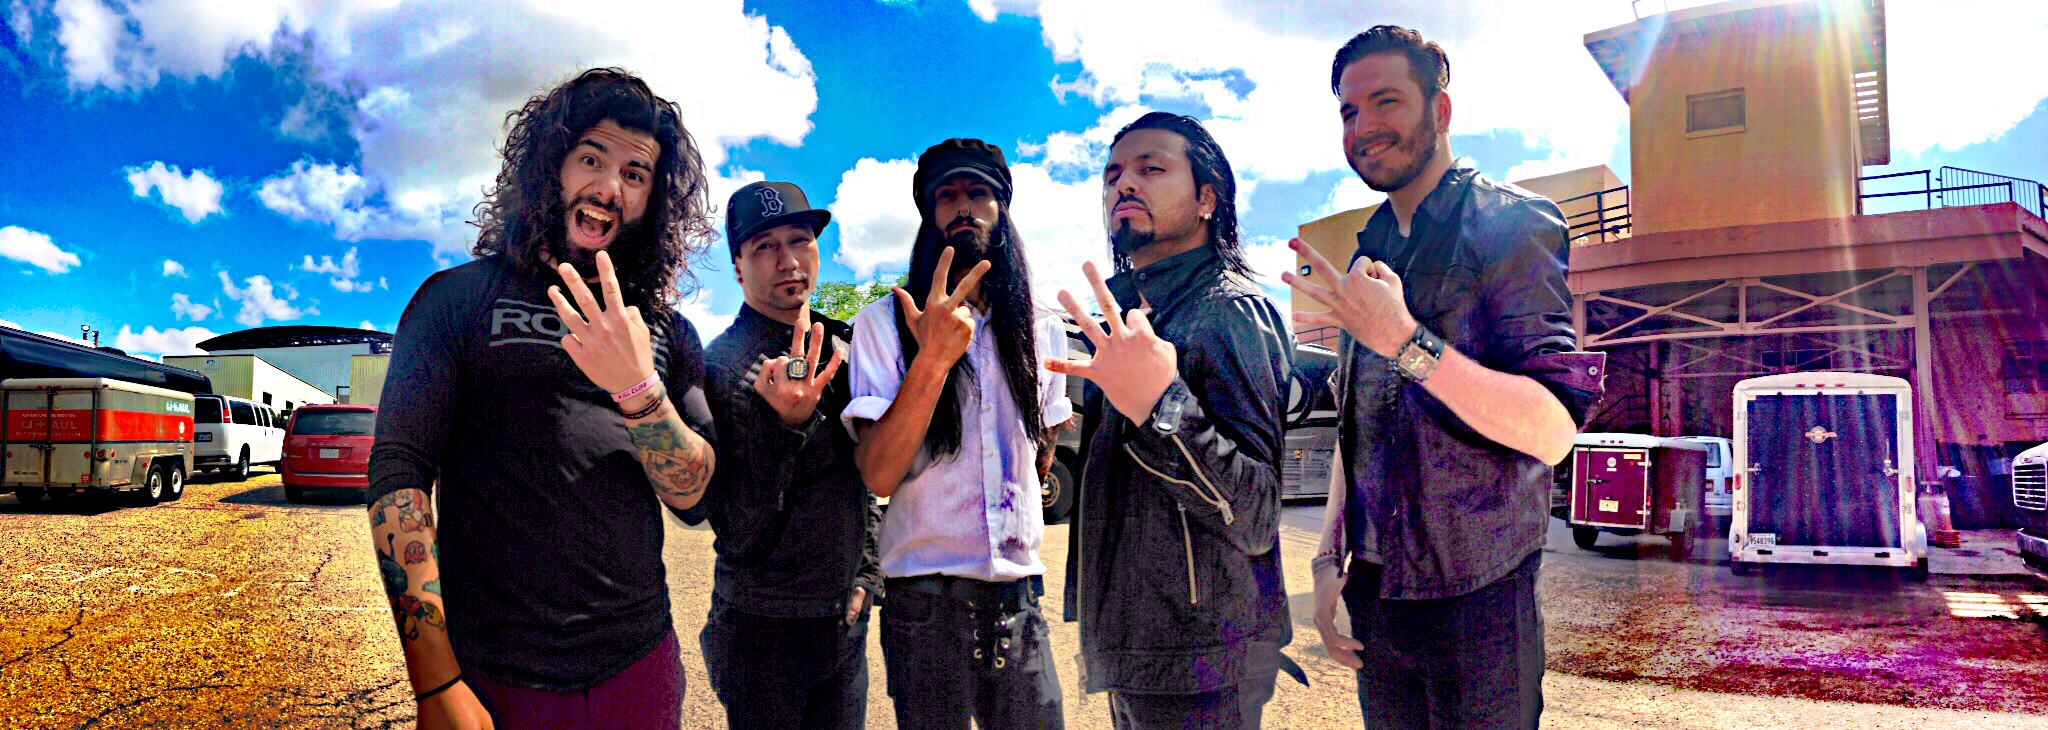 Pop Evil’s ‘Torn To Pieces’ Third #1 Rock Single From ‘Onyx’